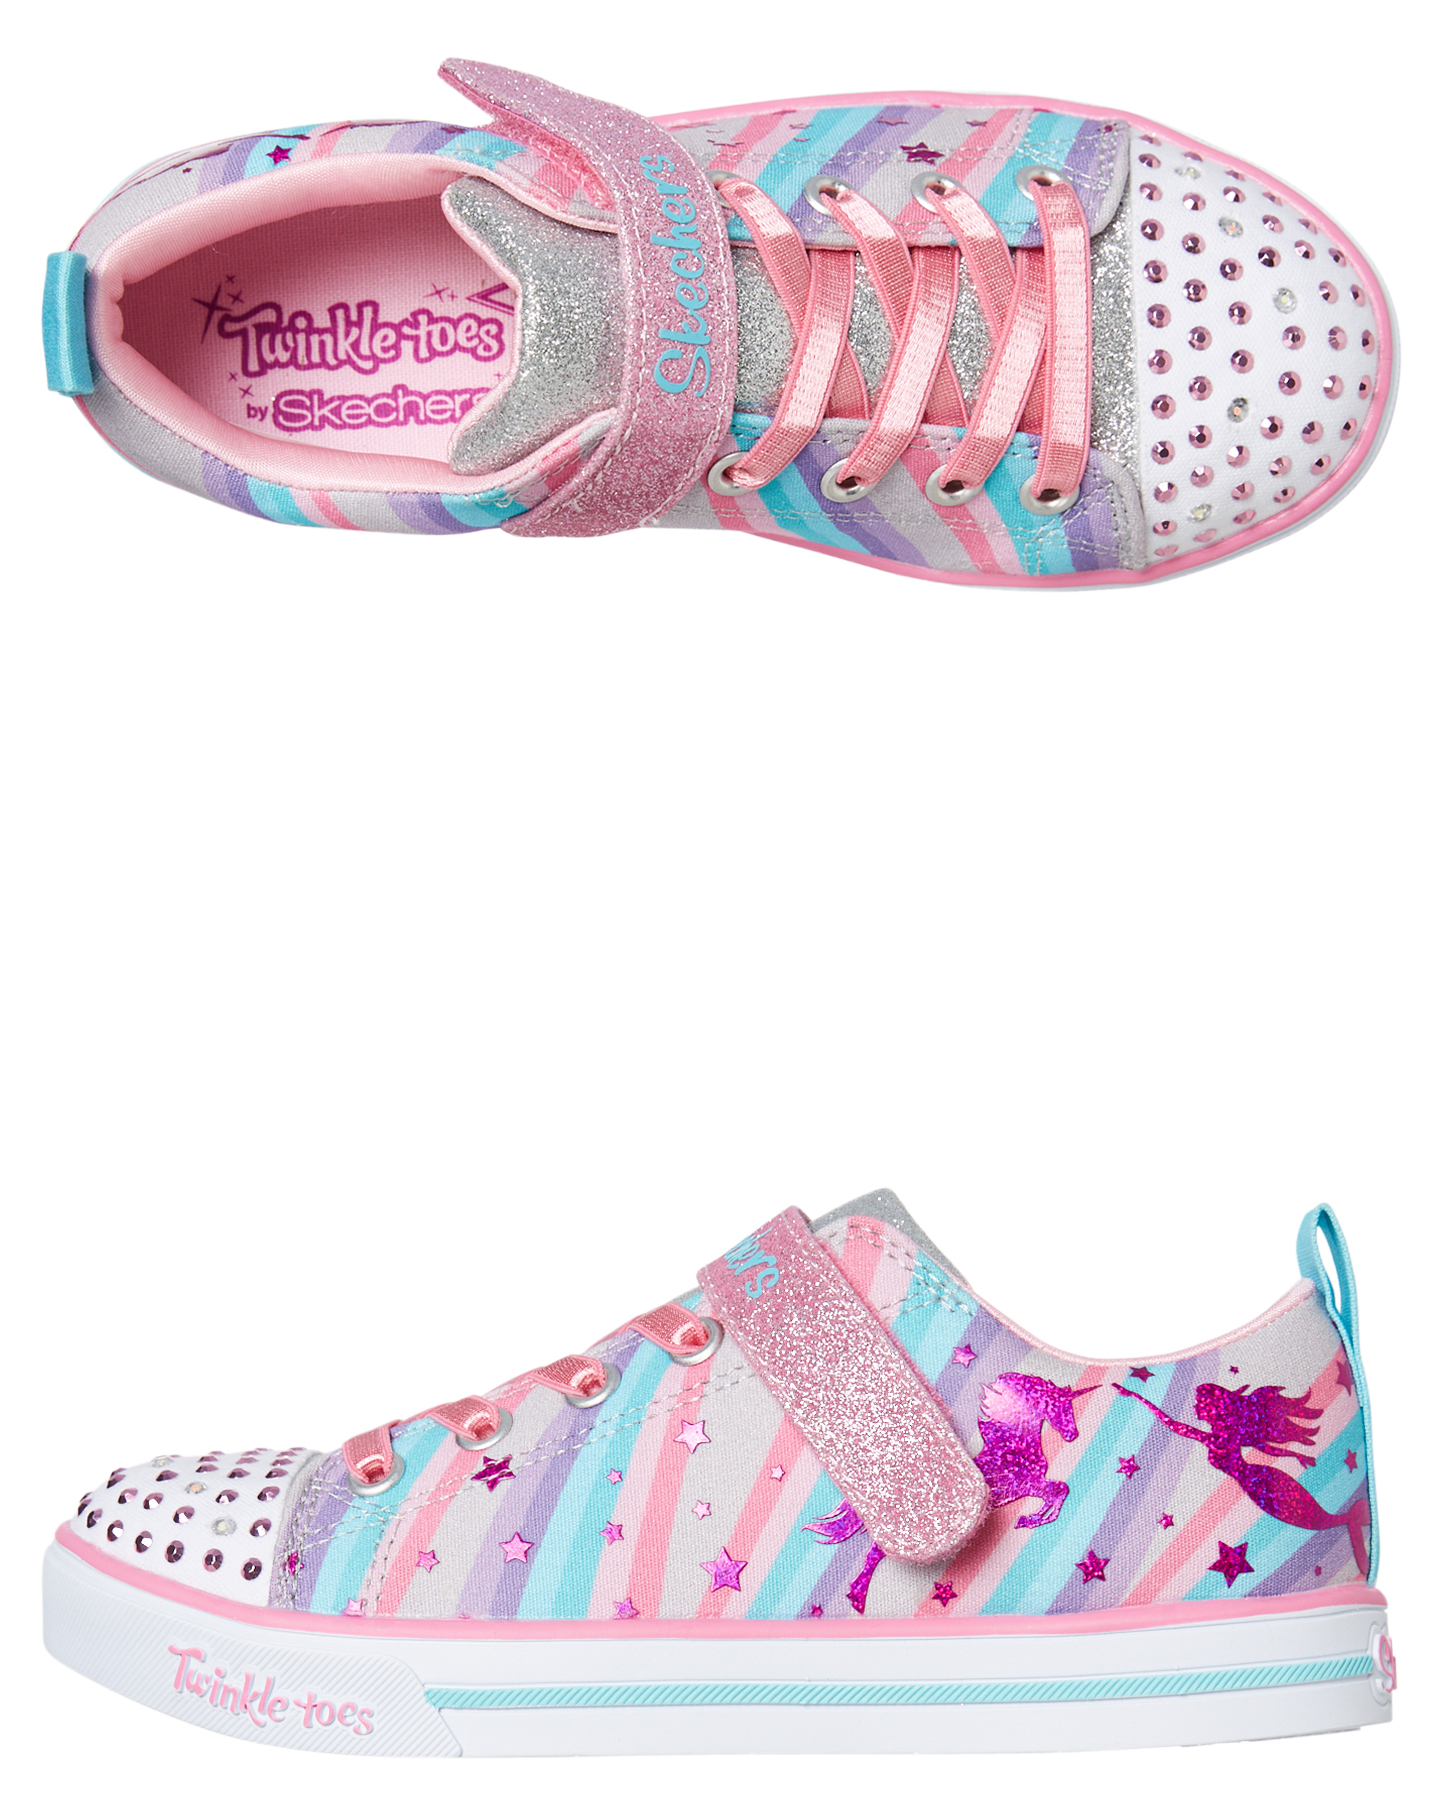 skechers childrens shoes